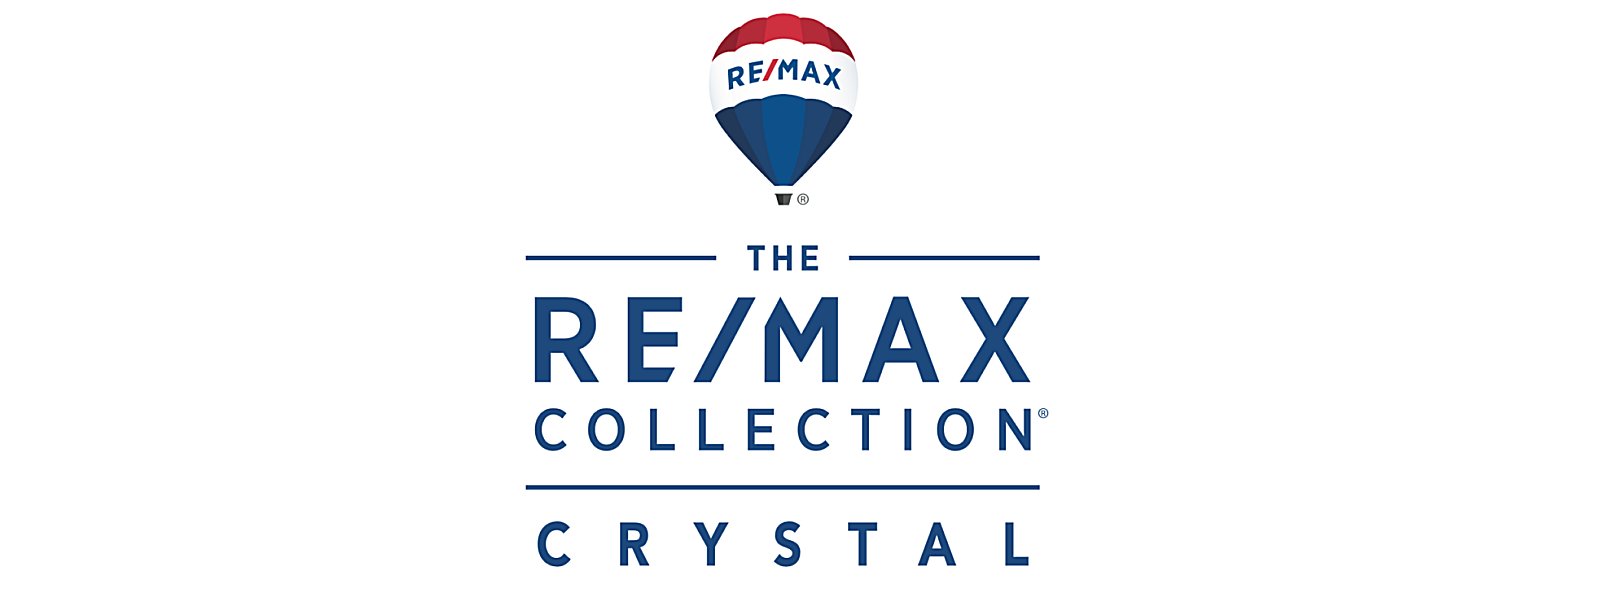 The RE/MAX Collection Luxury Lakeview